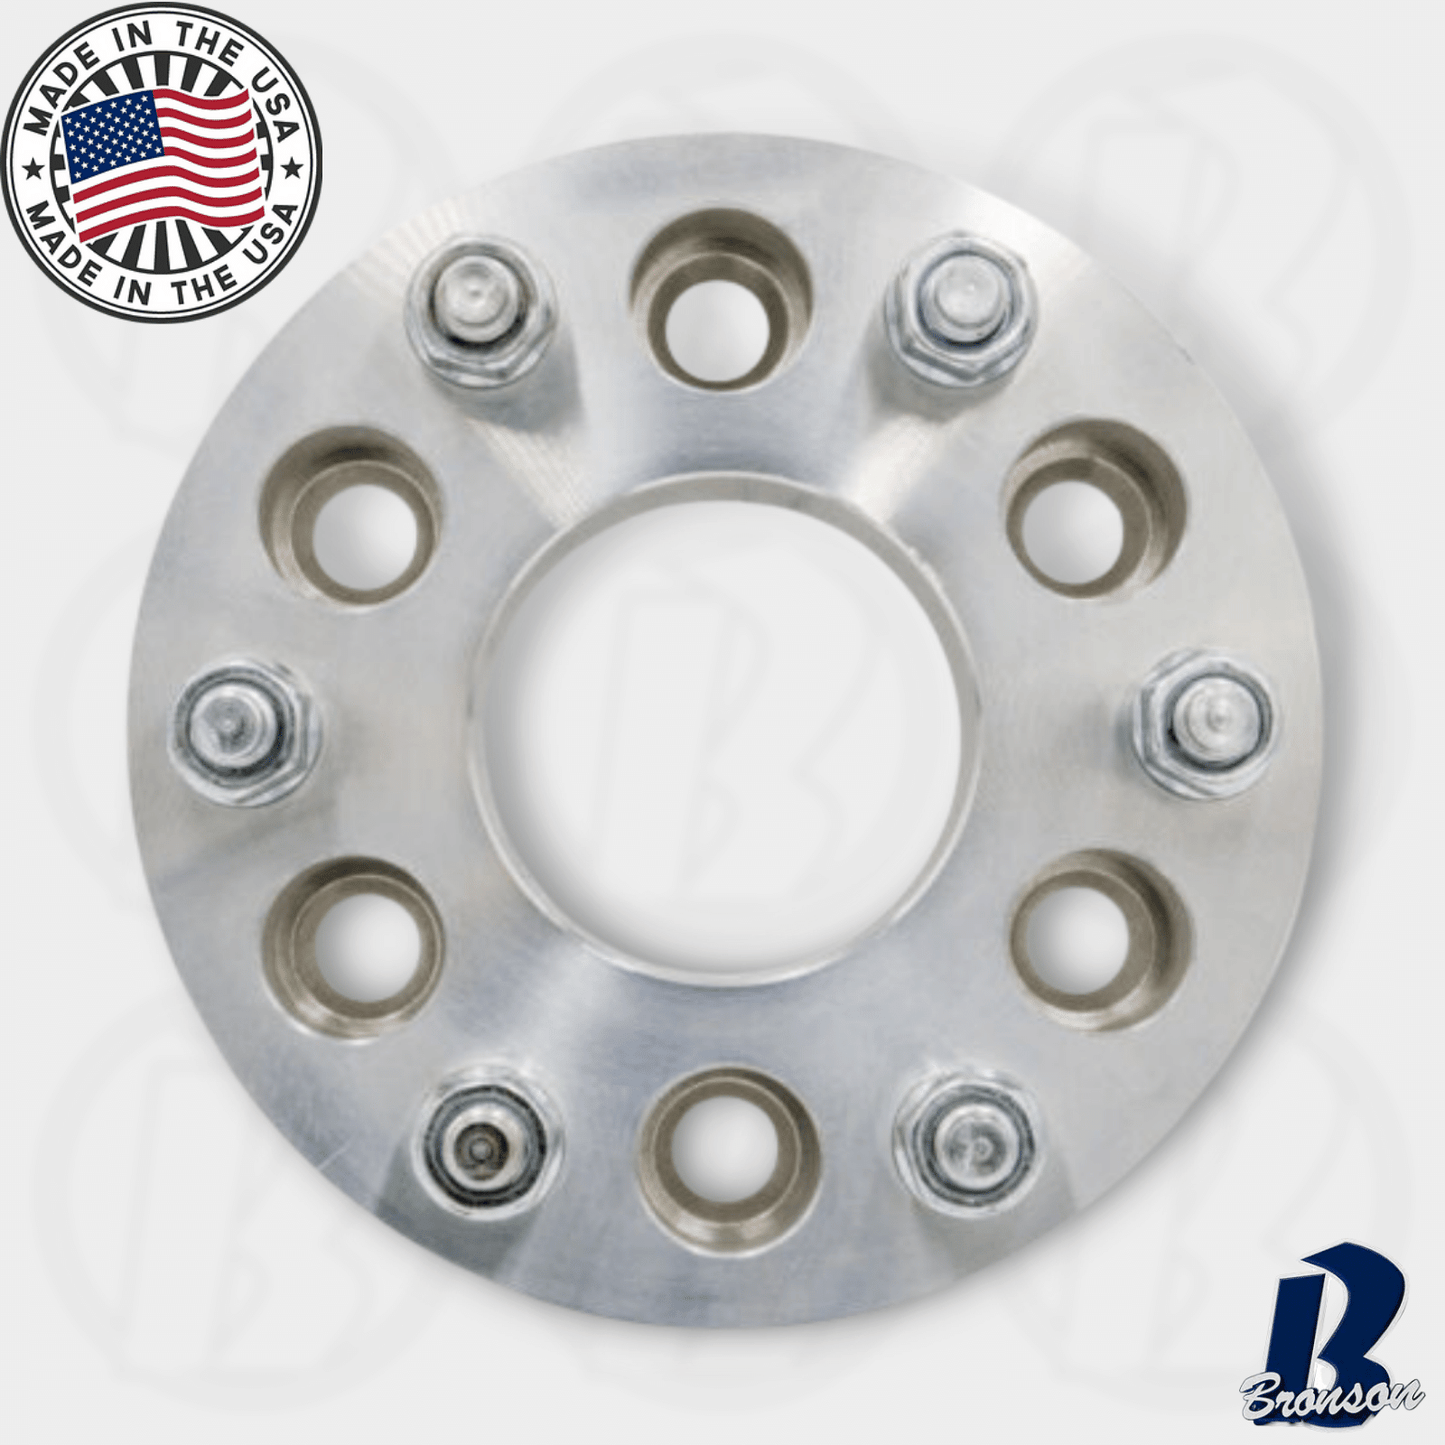 6x5.5" to 6x6.5" Hub Centric Wheel Spacer/Adapter - Thickness: 3/4"- 4"